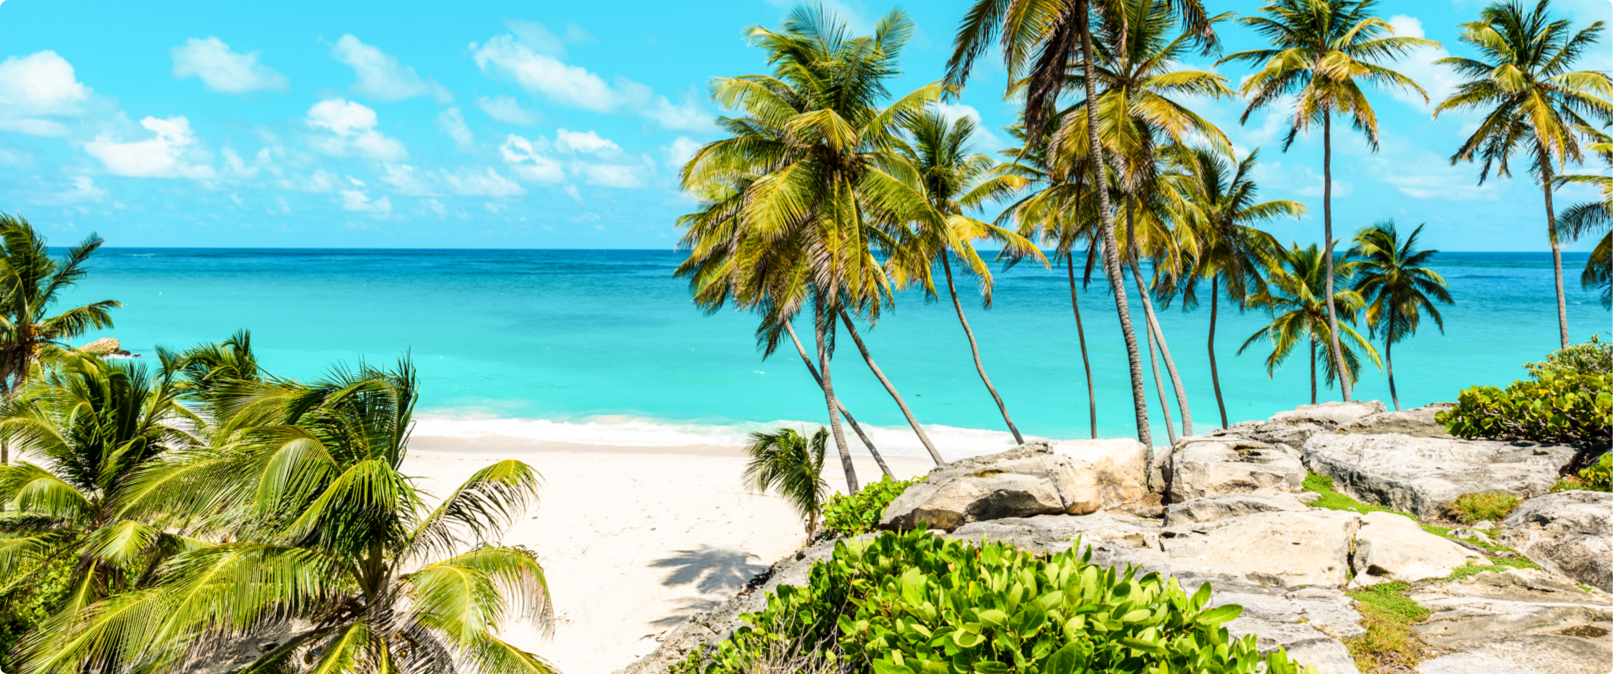 Beautiful beach scene with palm trees and clear skies.